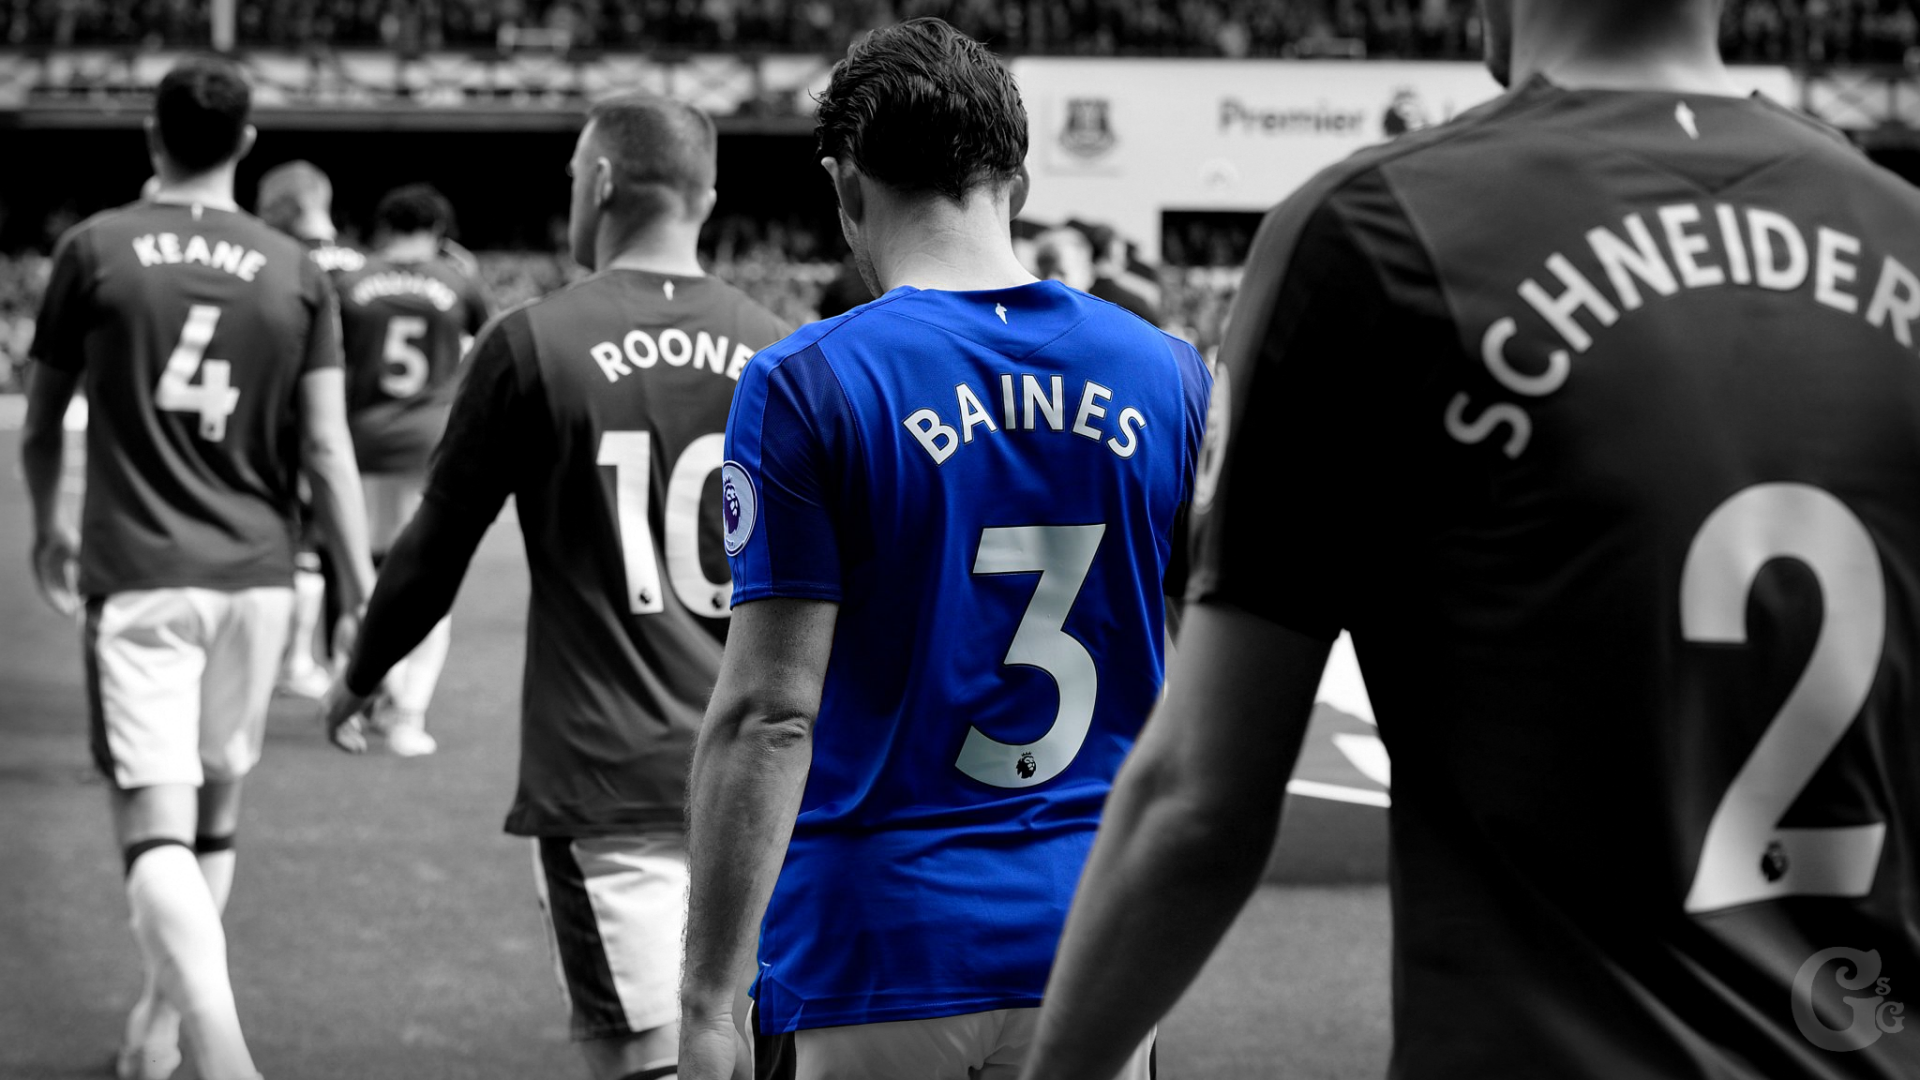 Everton and Leighton Baines; a tale of 